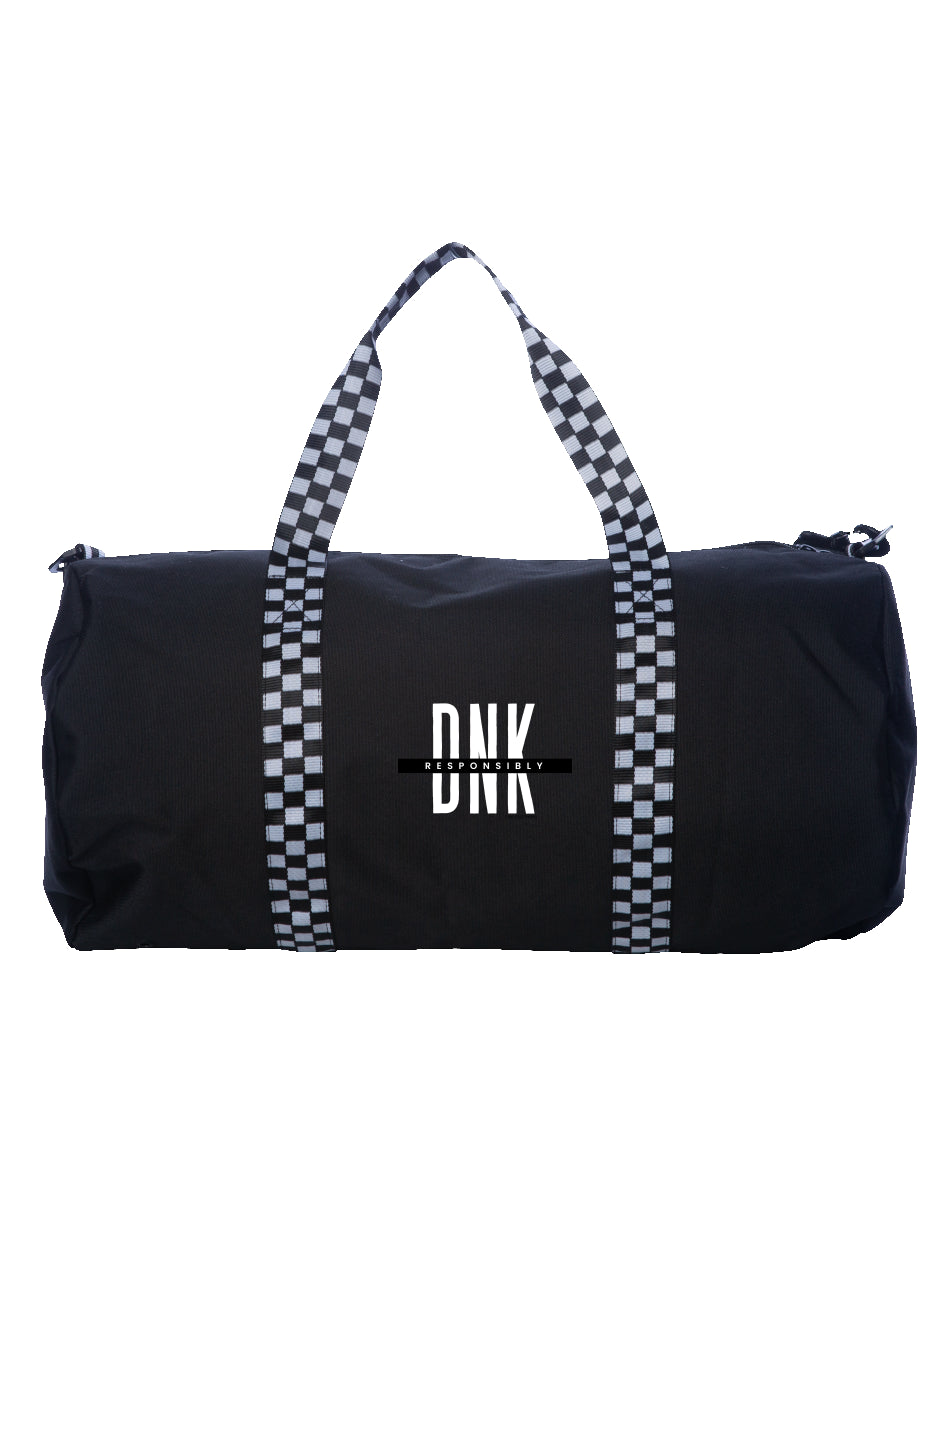 DNK Responsibly Court Duffle